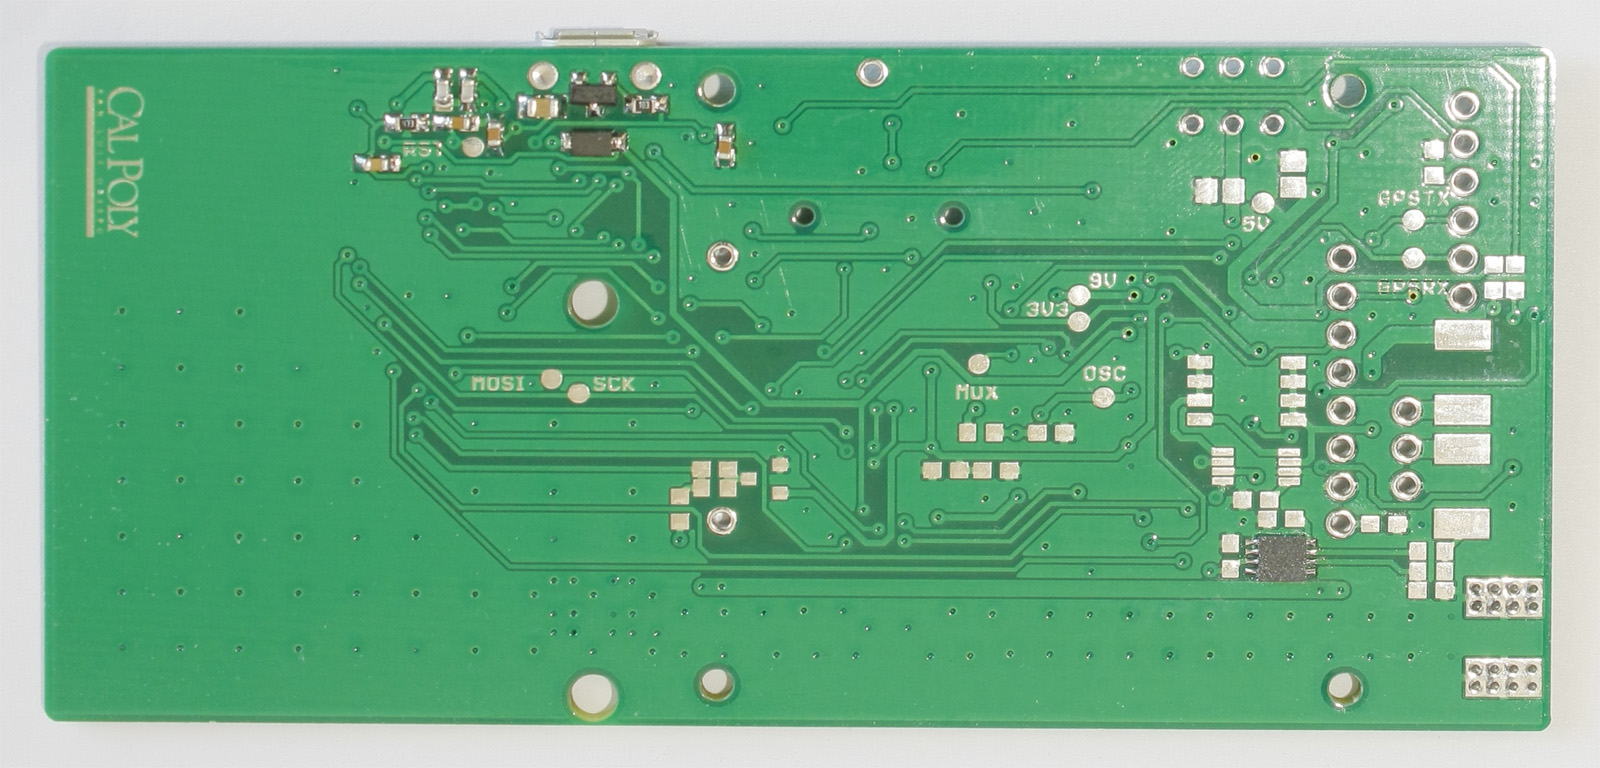 Bottom of PCB after soldering MCU section and reflowing SMD LiPo monitor IC